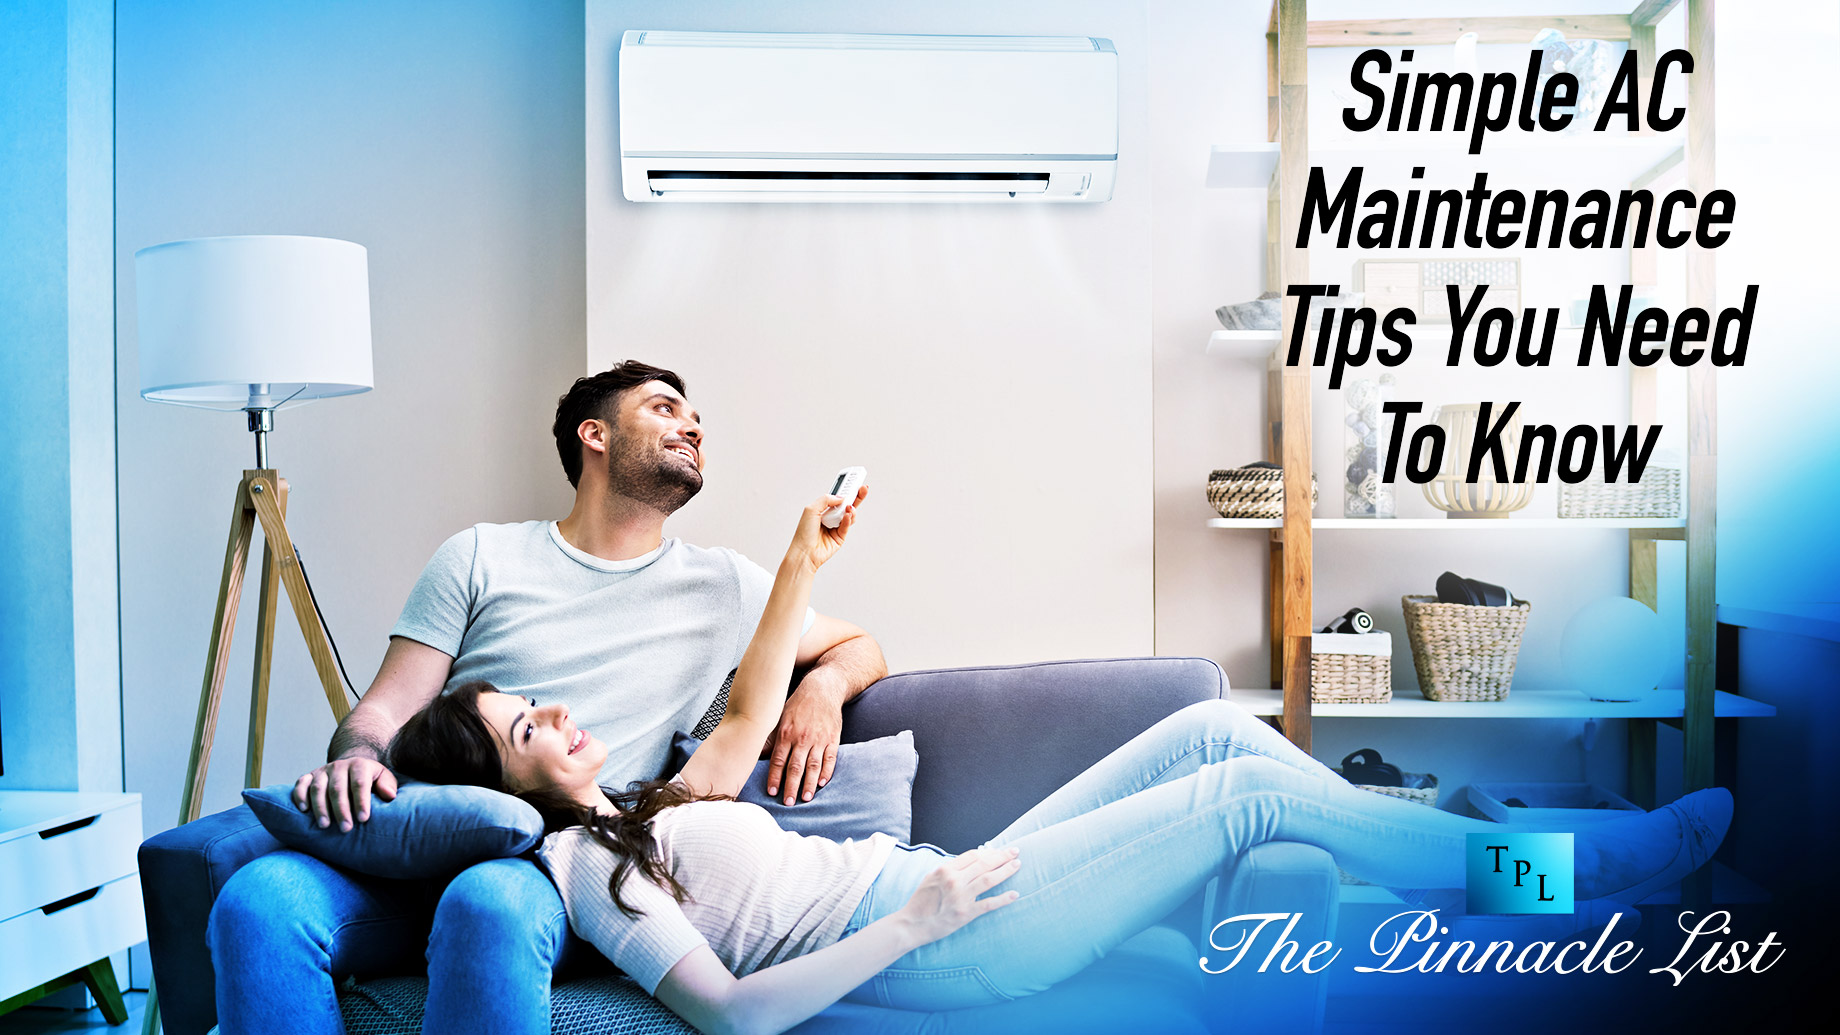 Simple AC Maintenance Tips You Need To Know